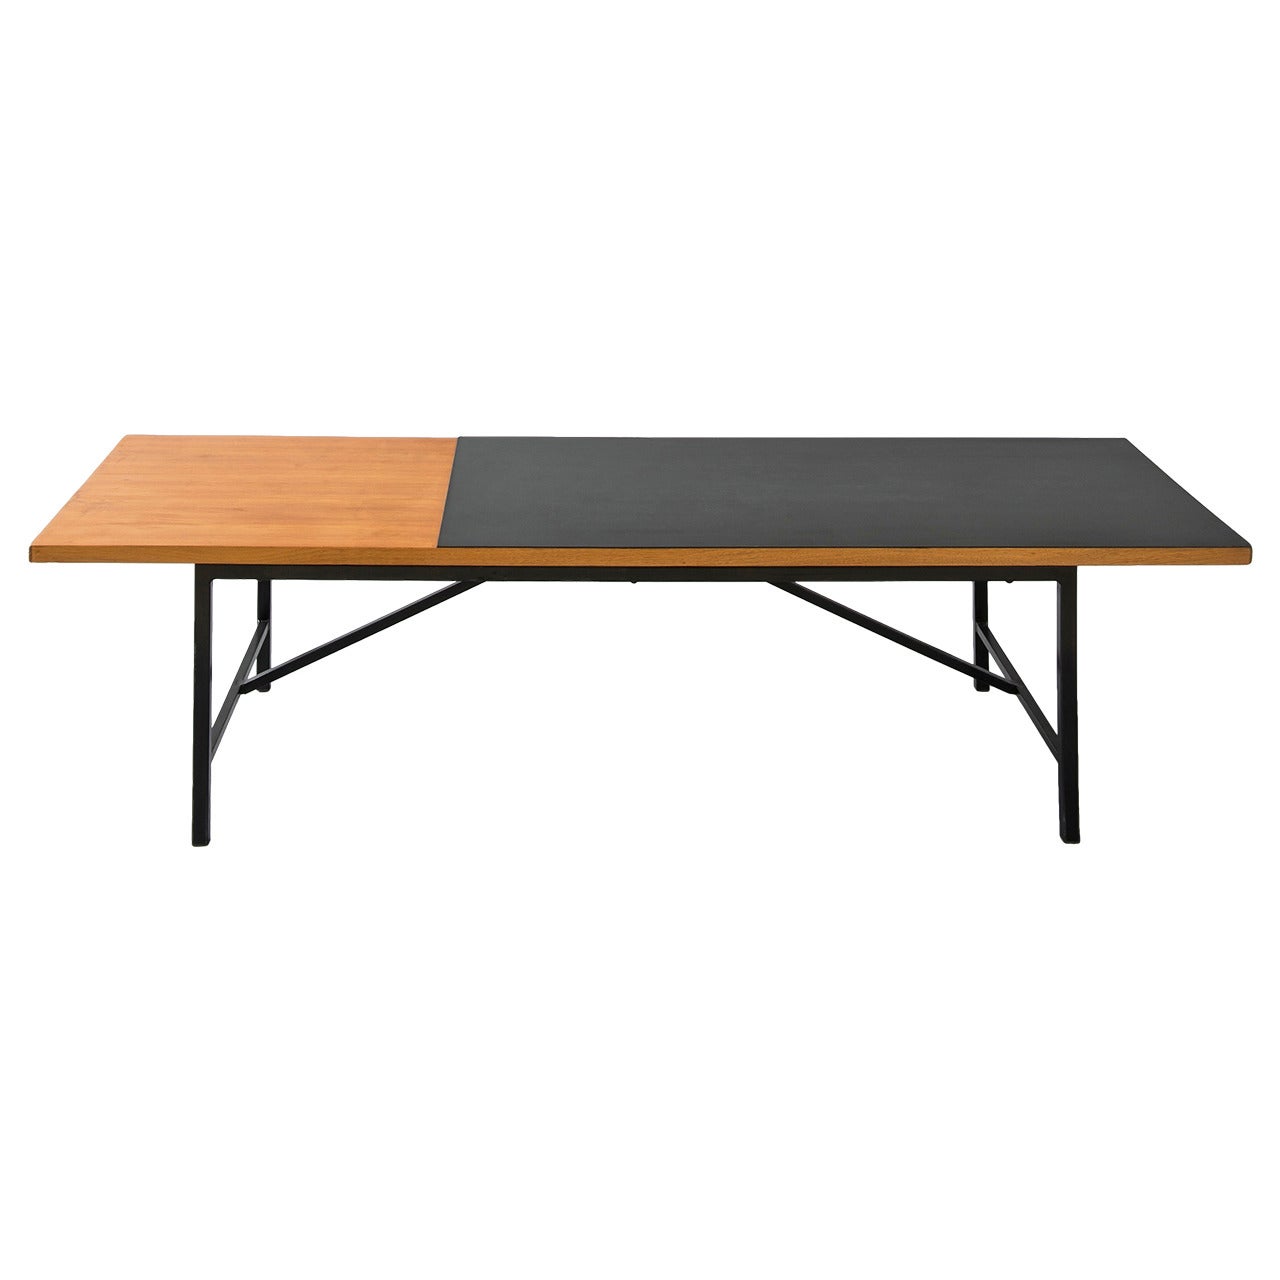 Low table - bench by André Simard - André Simard edition - Circa 1955